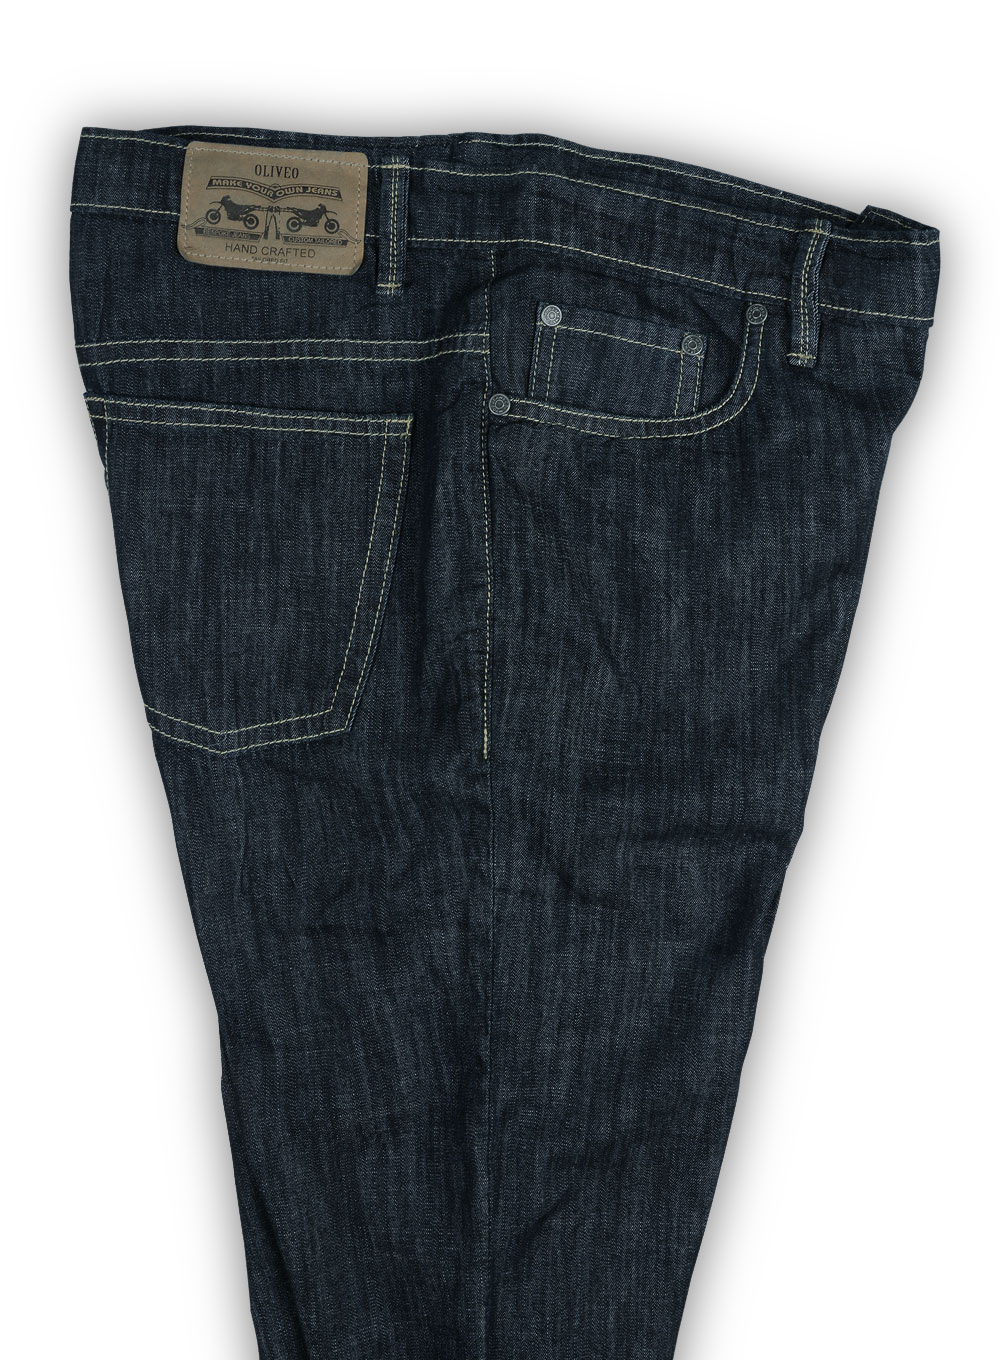 6oz Feather Light Weight Jeans - Hard Wash